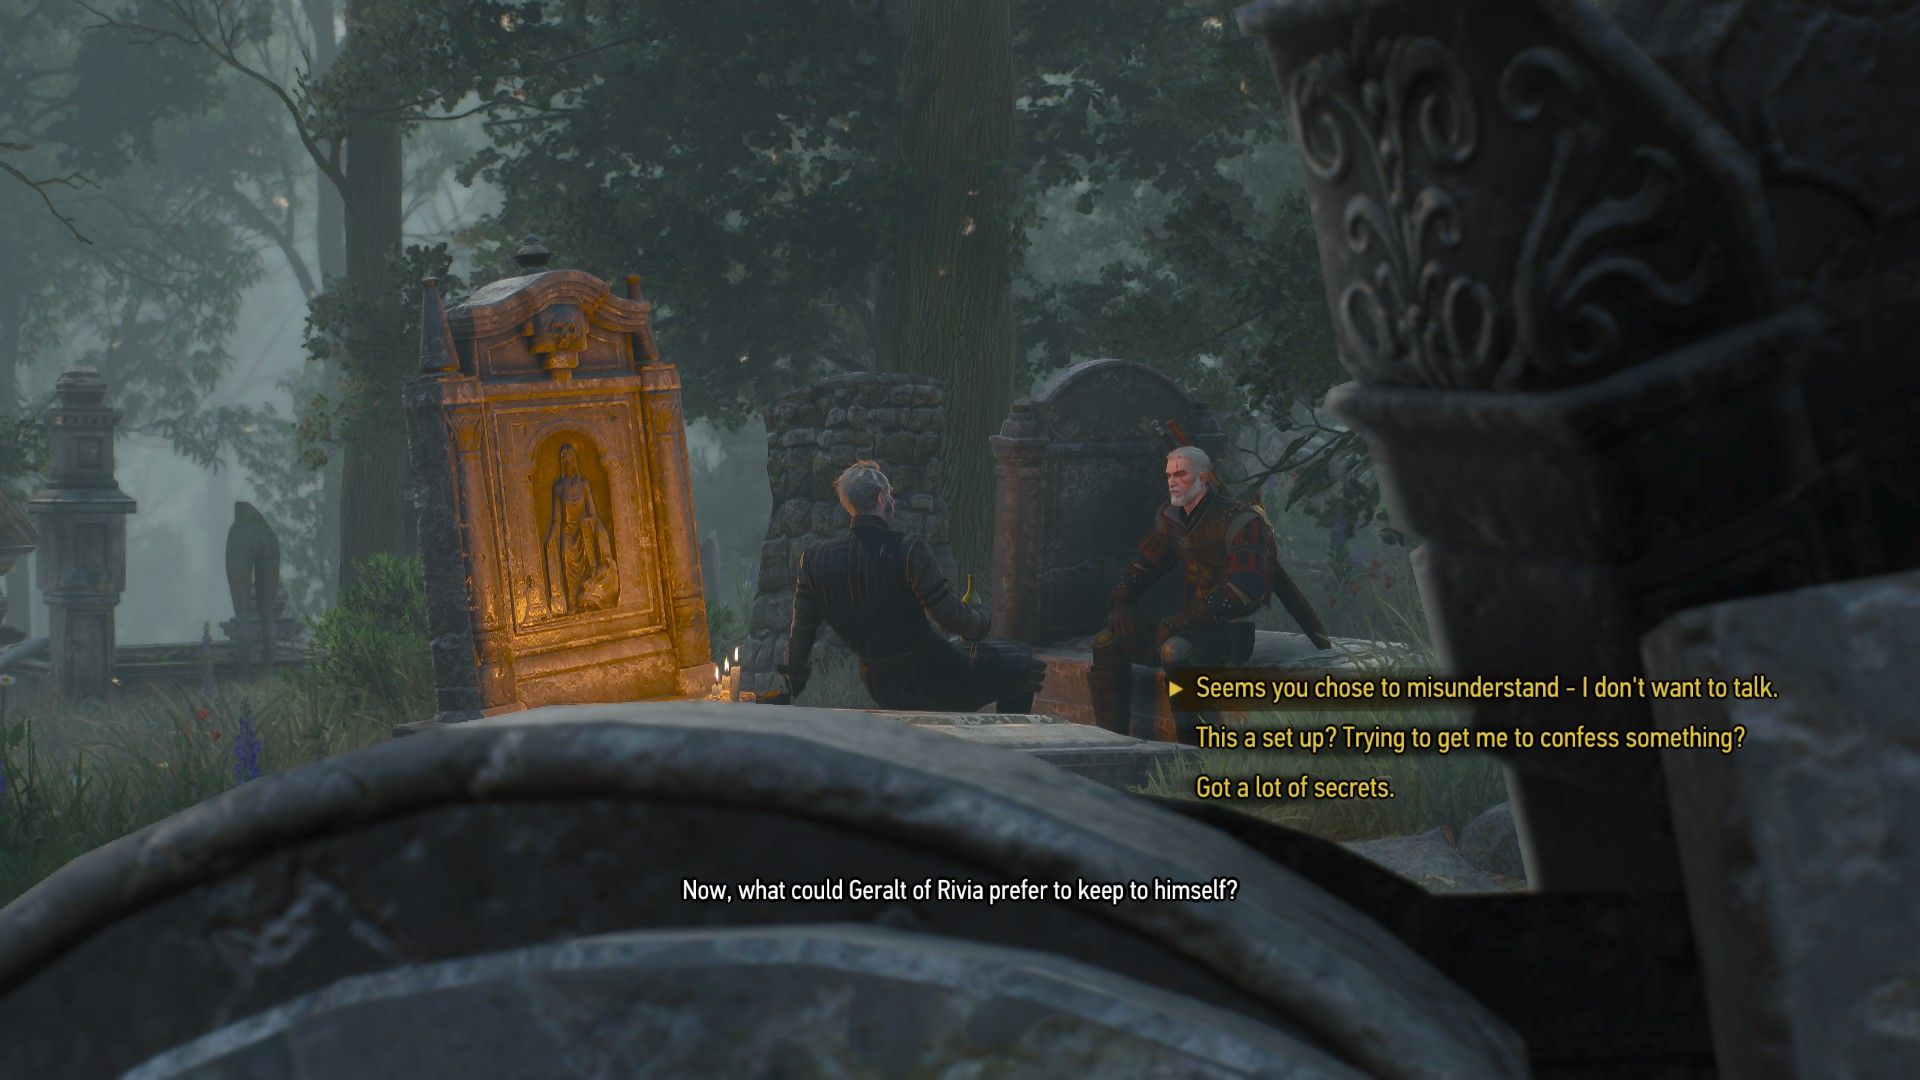 Screenshot of Geralt and Regis talking in the graveyard with dialogue options visible.